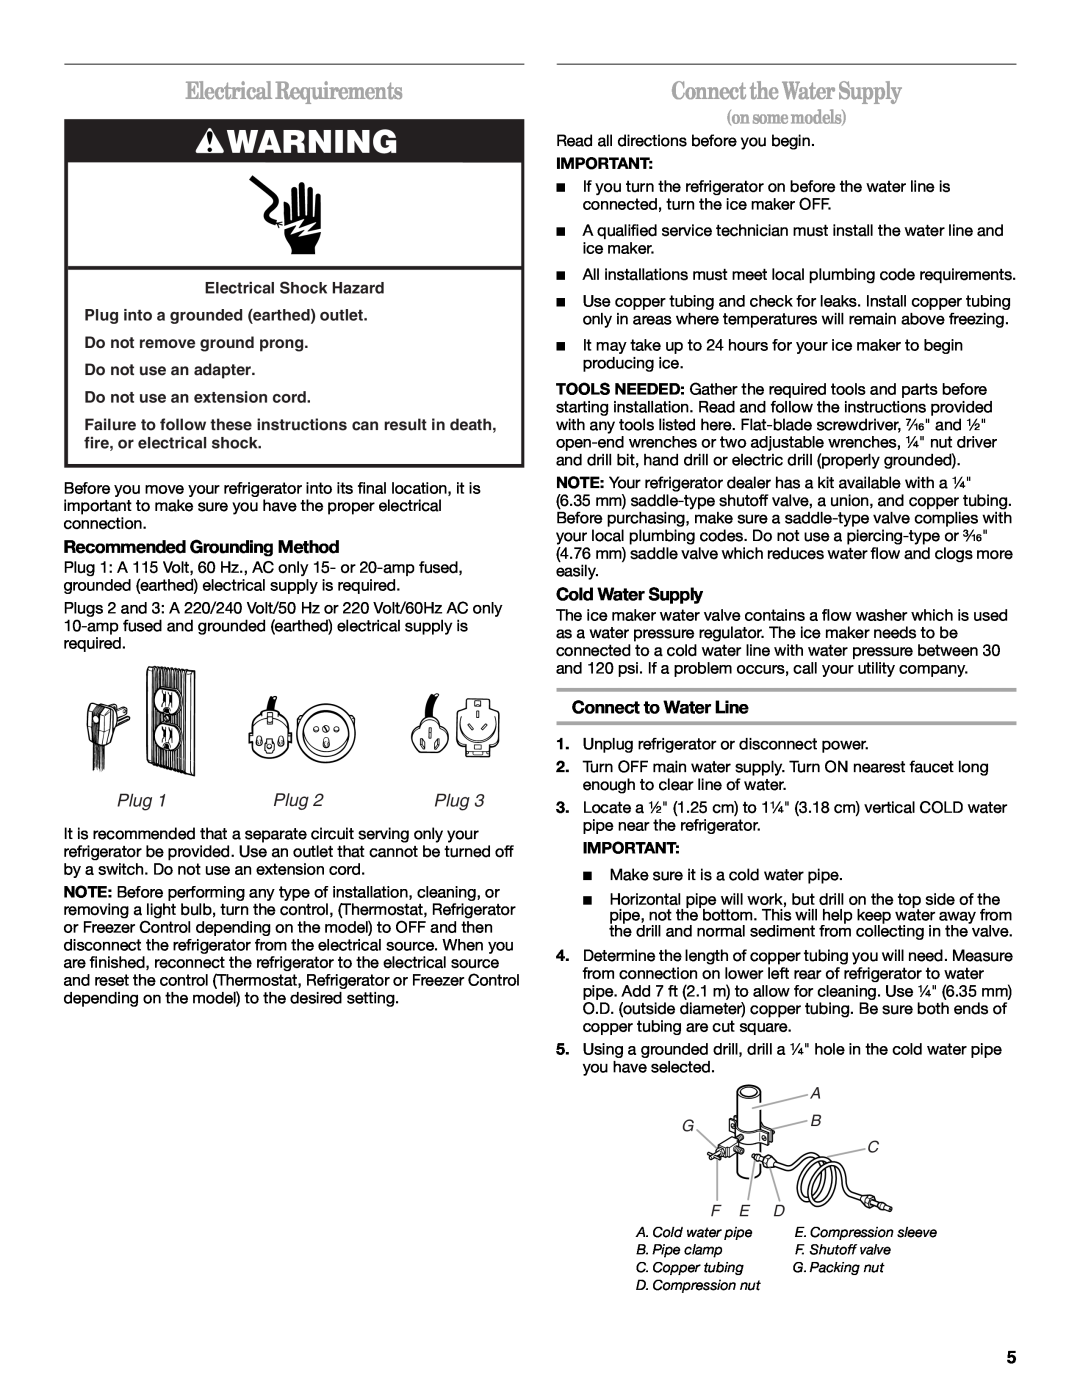 Whirlpool 2314183 Electrical Requirements, ConnecttheWaterSupply, onsomemodels, Recommended Grounding Method, Plug, G F E 